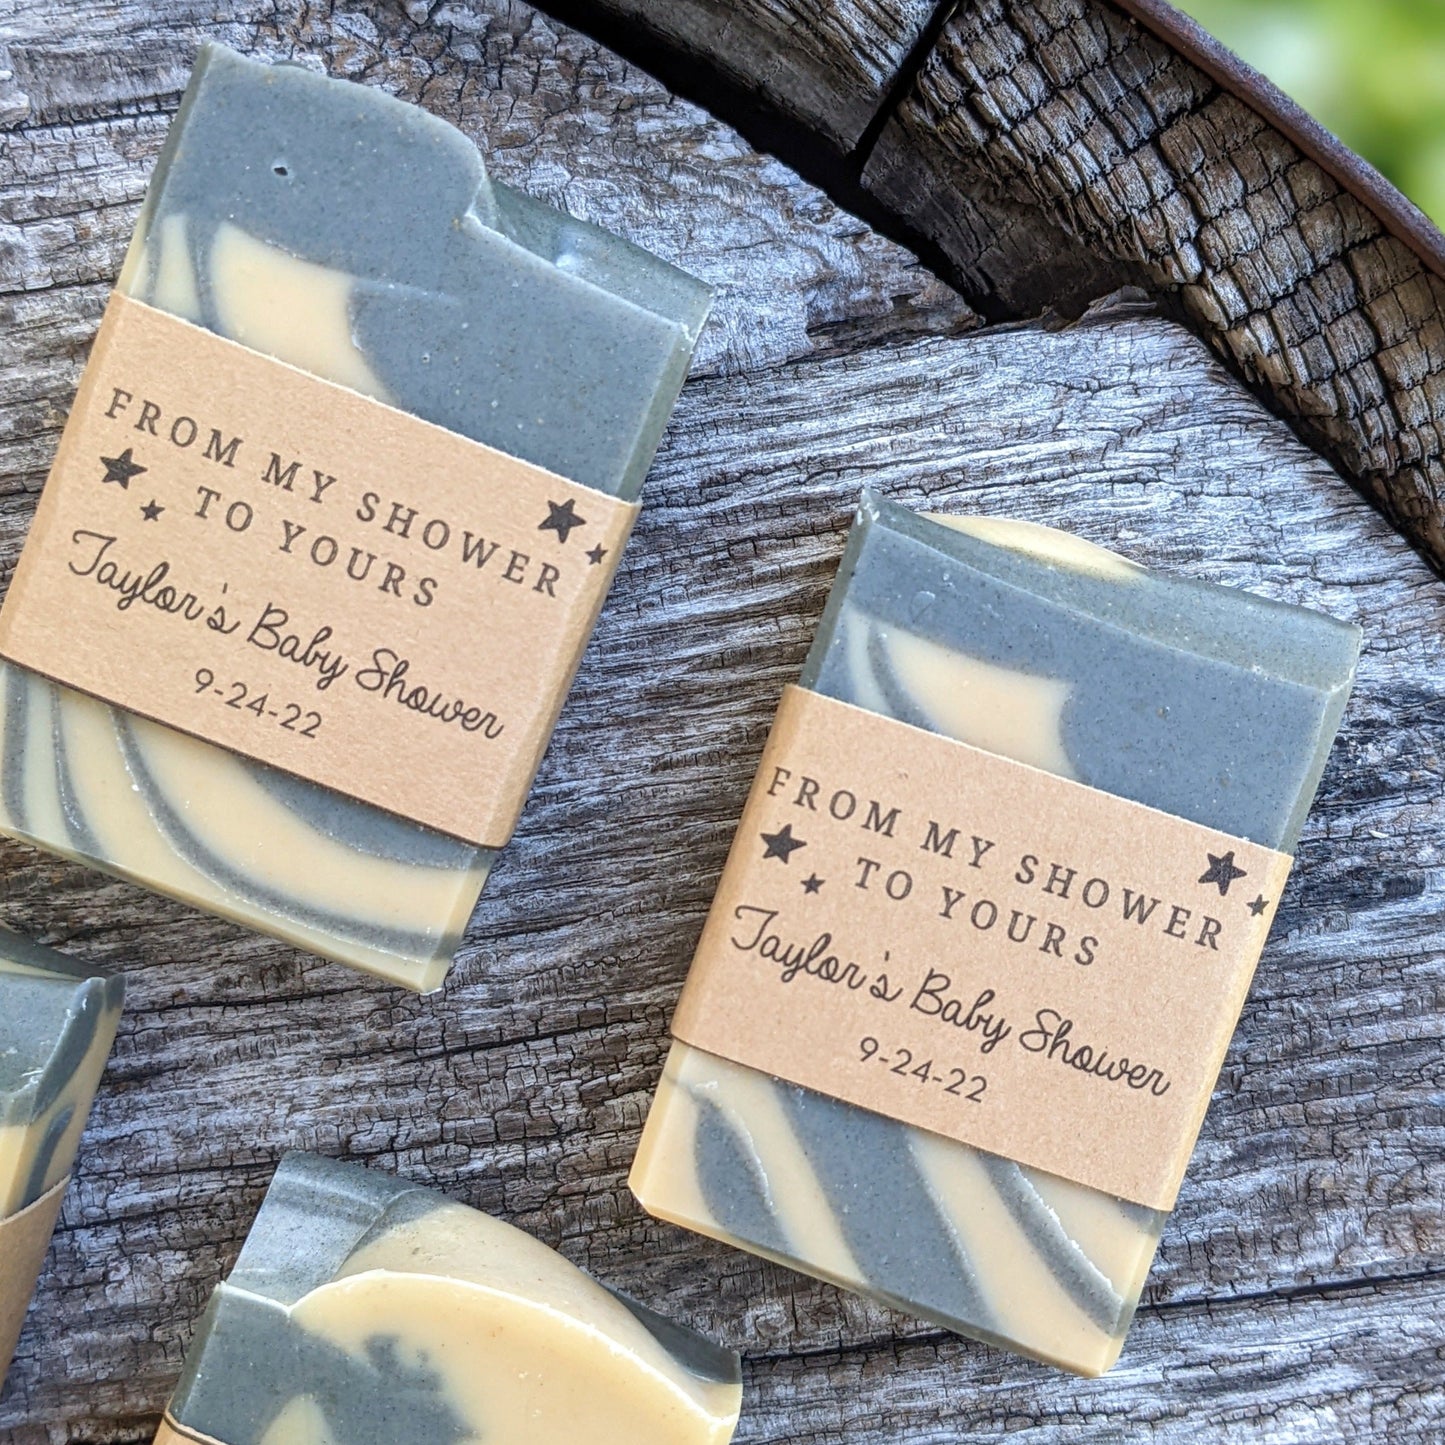 Soap Favors | Set of 20 Half Bar (2 oz) Soaps for Weddings, Showers, or Airbnb Guests